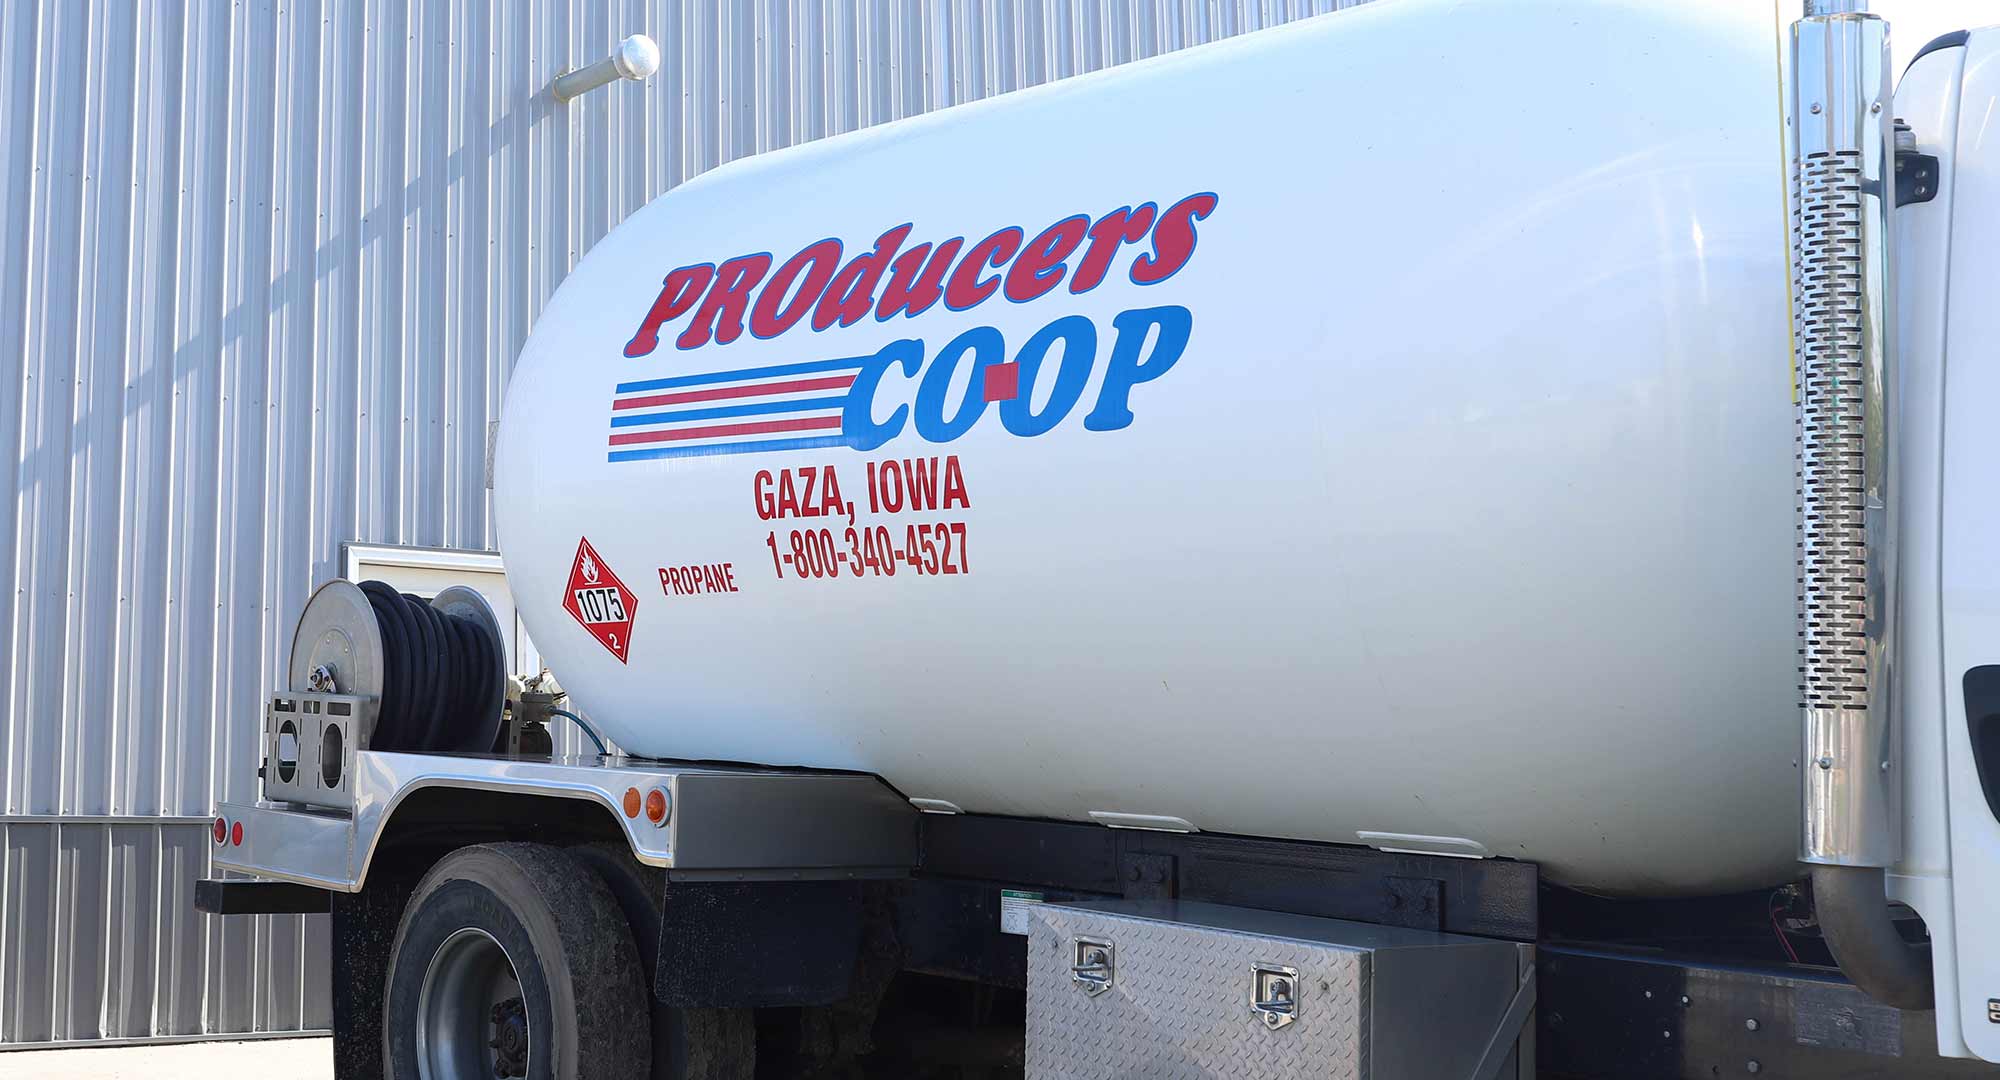 Producers Coop propane services in Northwest Iowa.